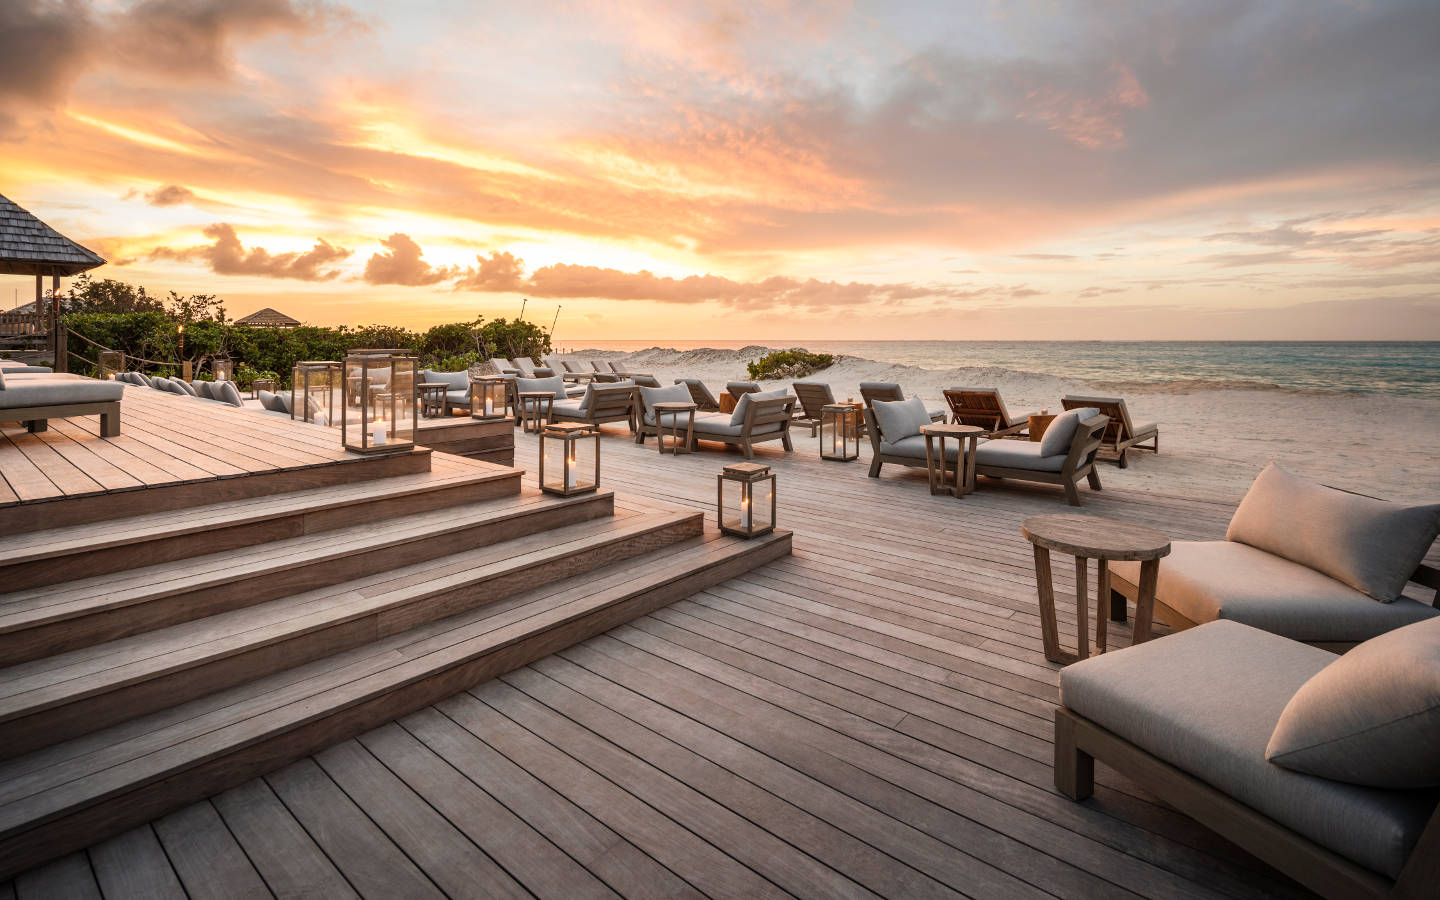 Parrot Cay - evening view of the deck area